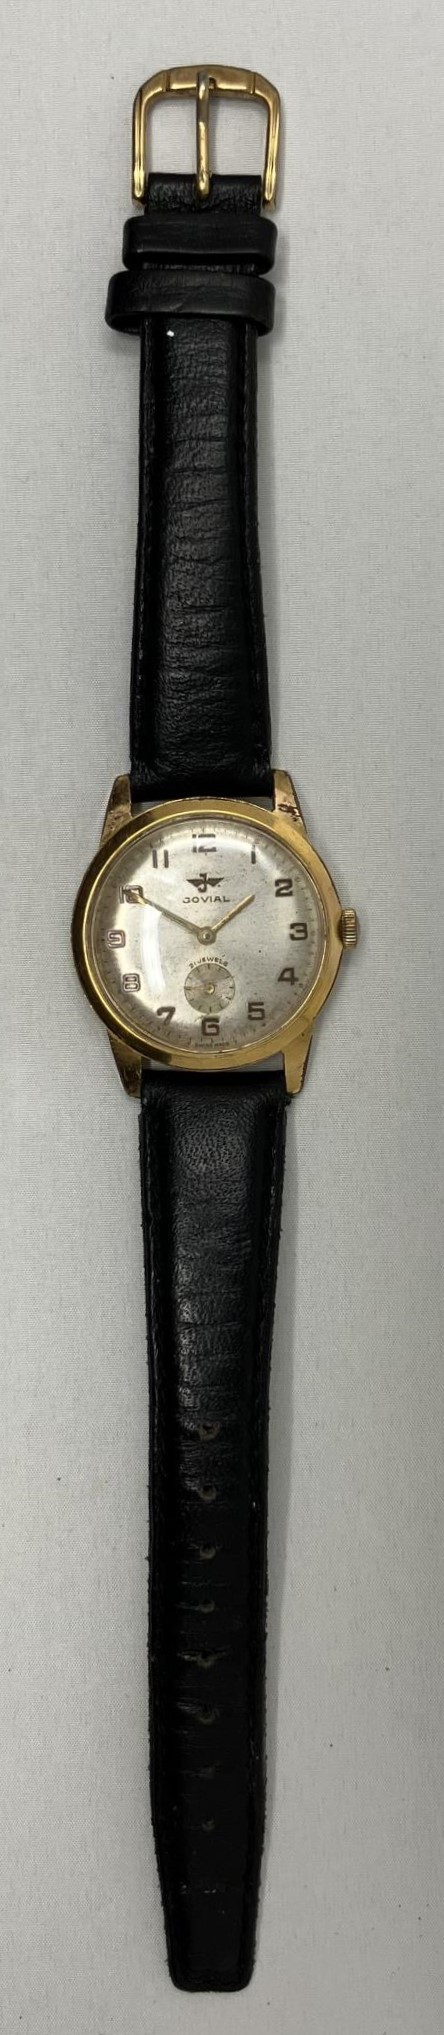 A gentleman's gold plated Jovial wristwatch, on a later leather strap - Image 2 of 2